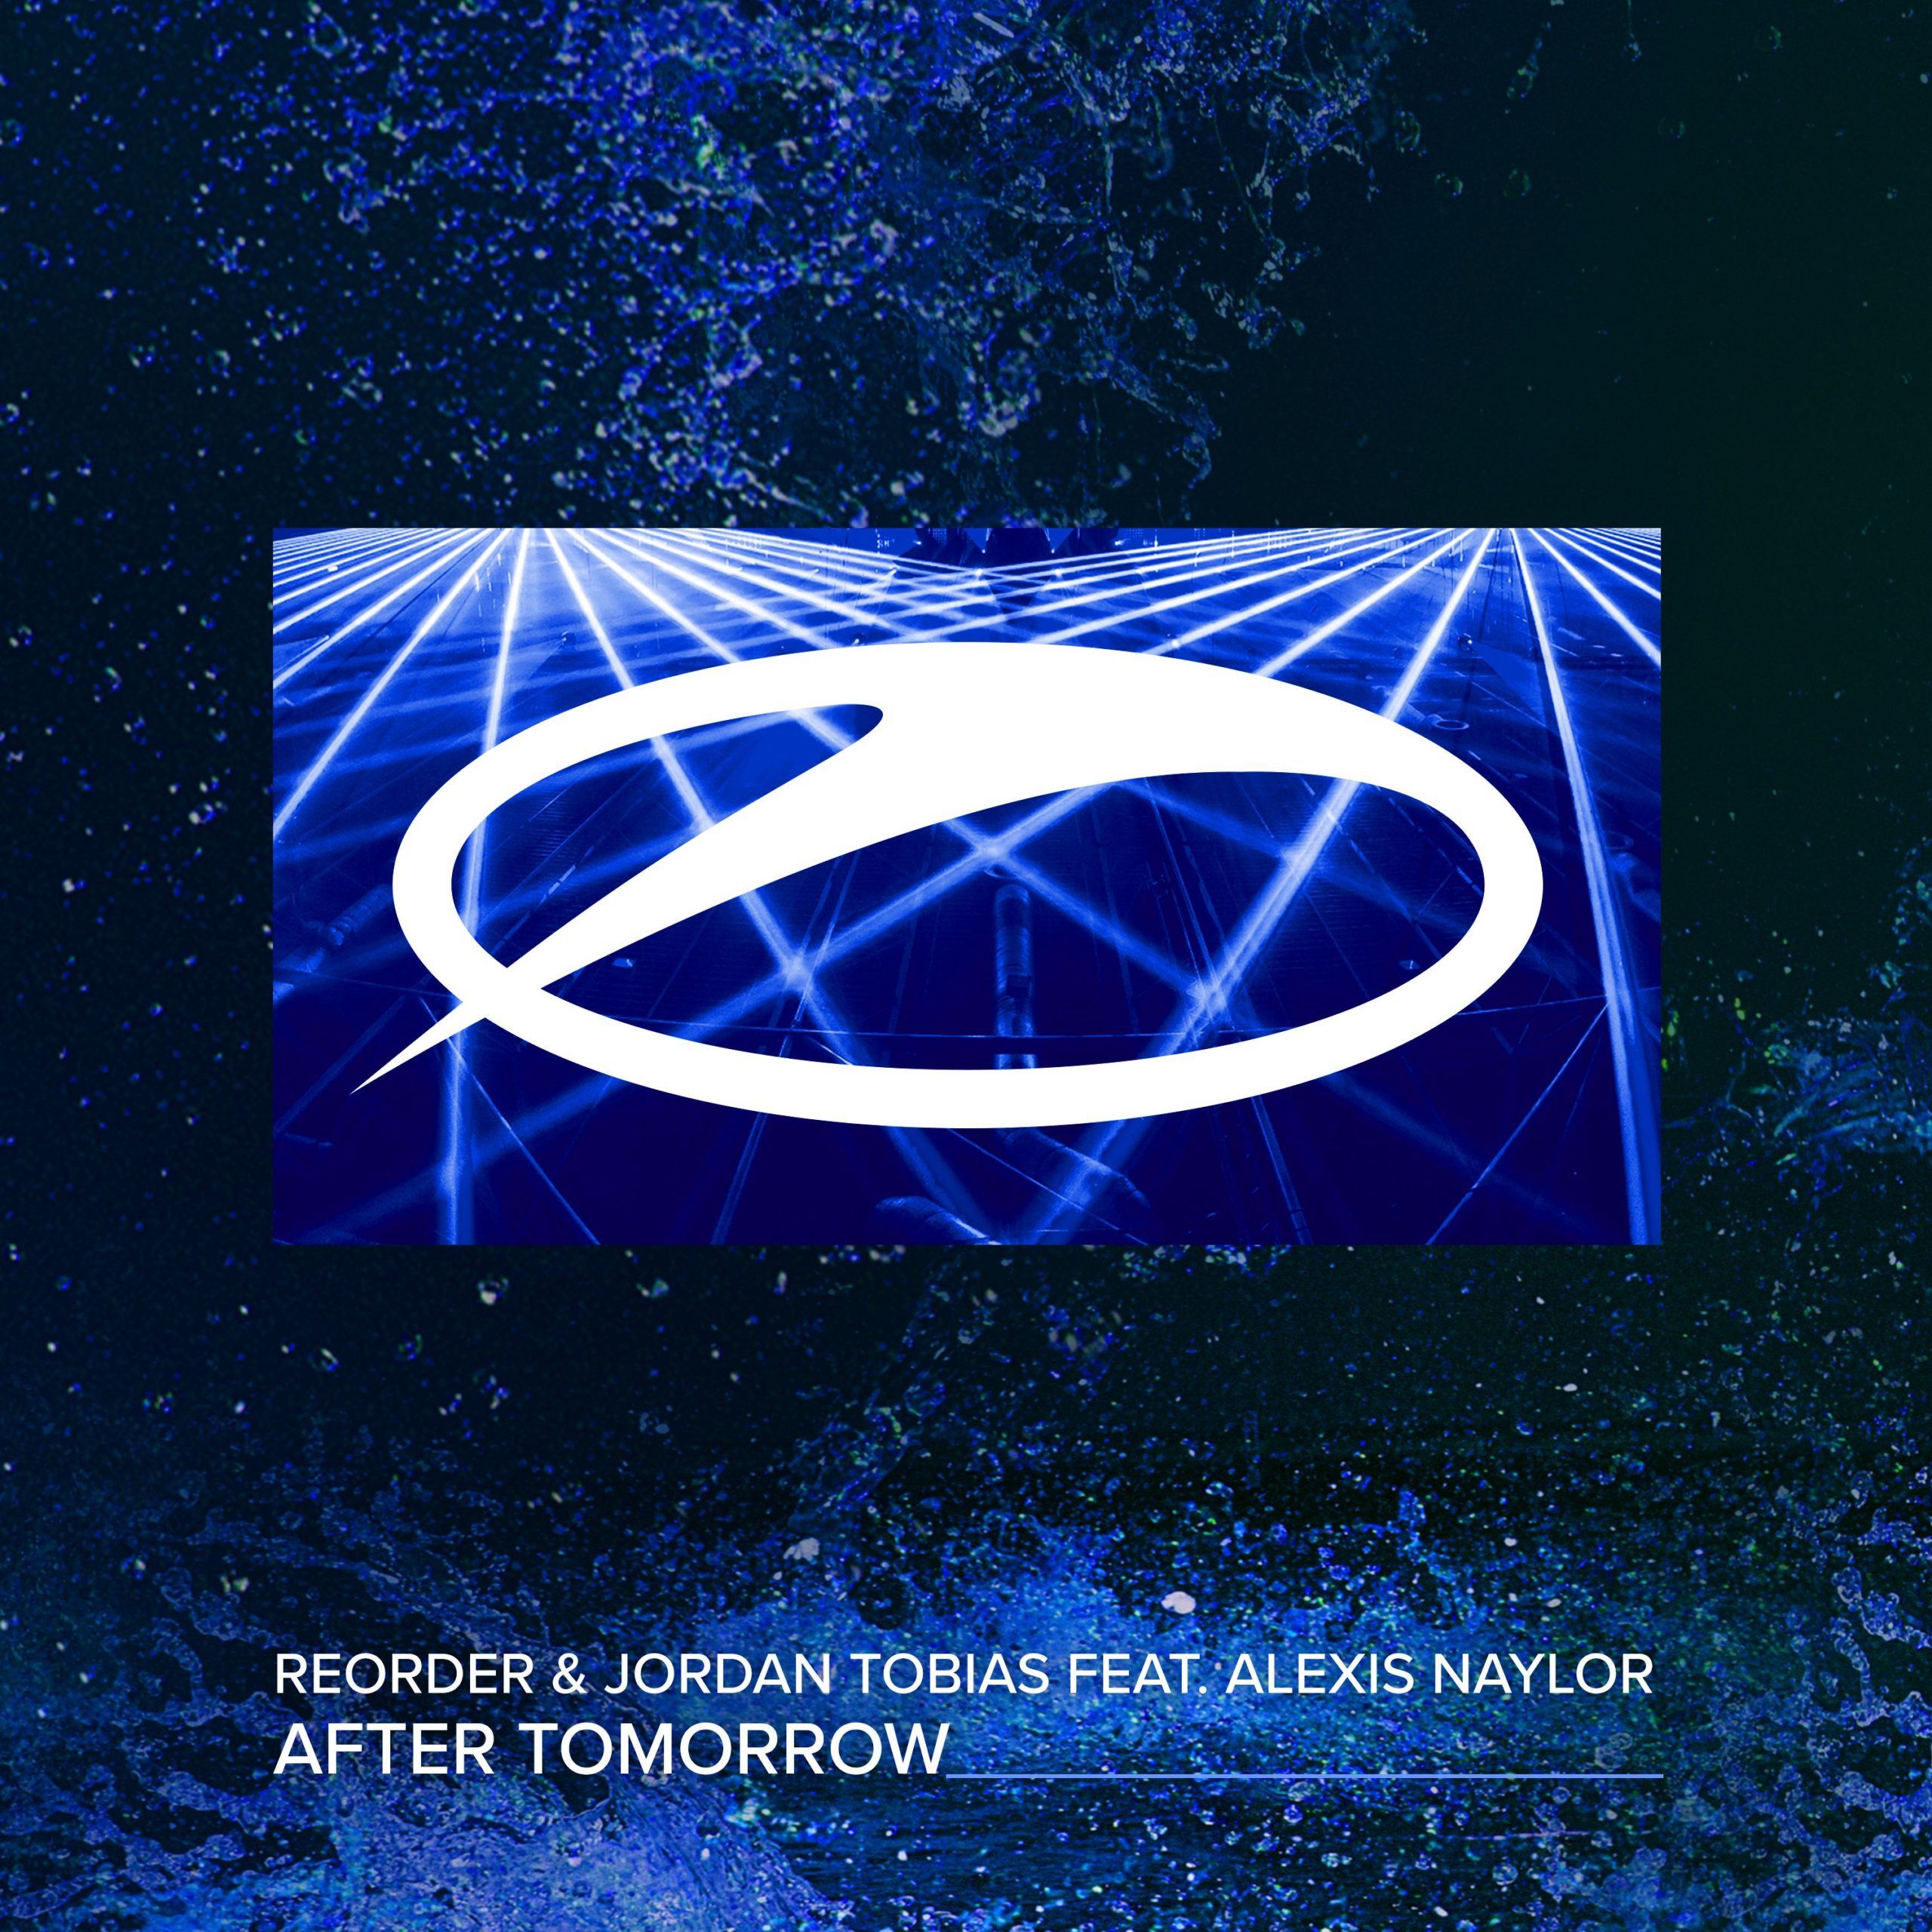 ReOrder and Jordan Tobias feat. Alexis Naylor presents After Tomorrow on A State Of Trance